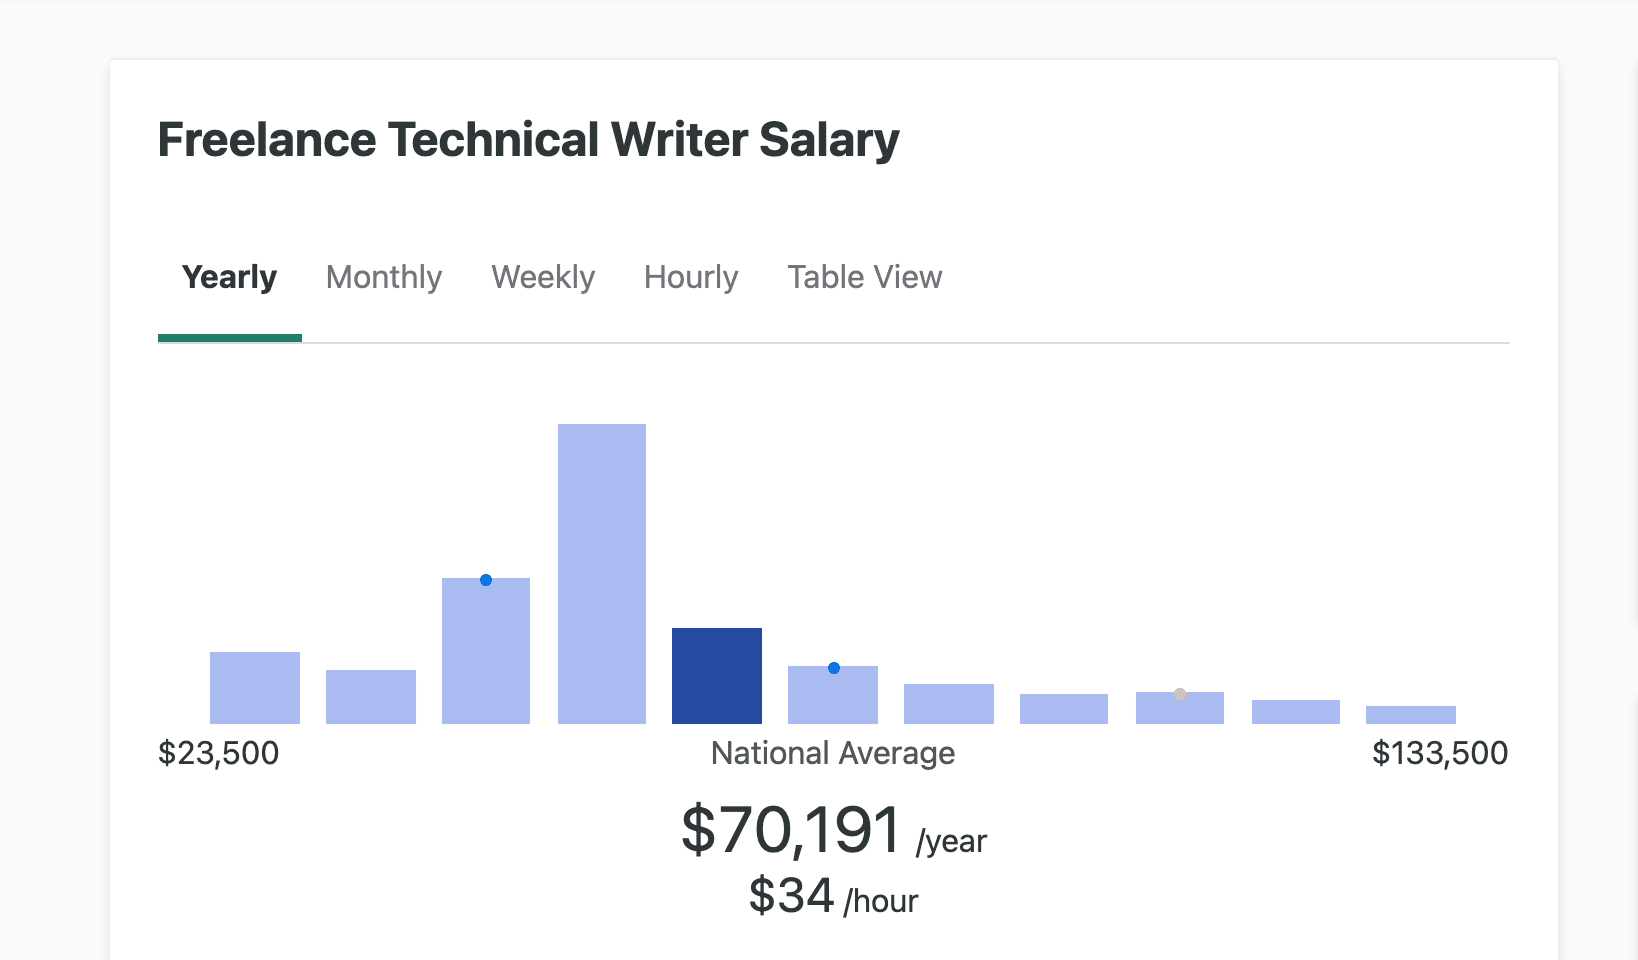 Graph showing average freelance technical writer salary in the United States.